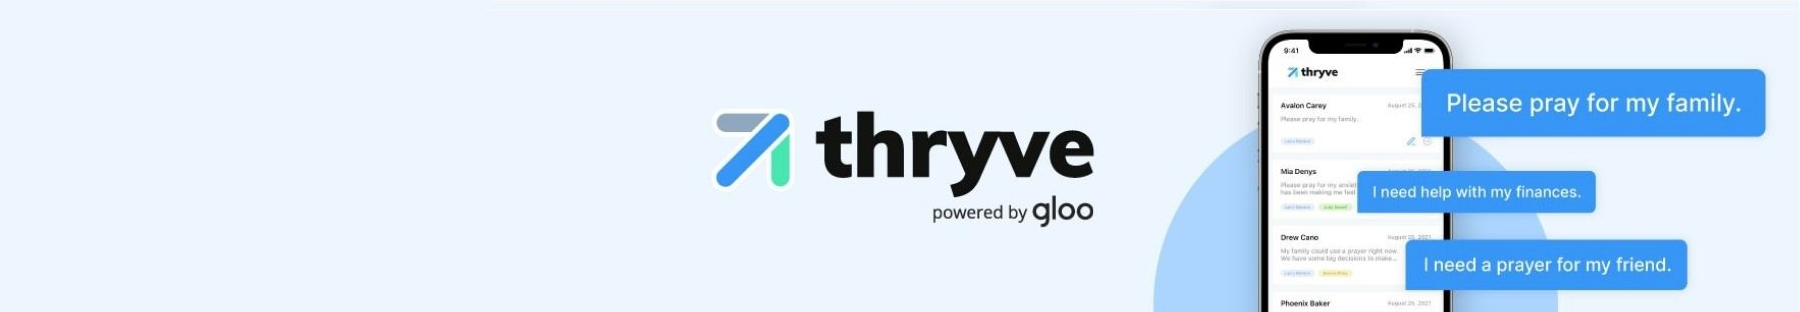 Increase Your Prayer Requests With Text - by Thryve Church Texting